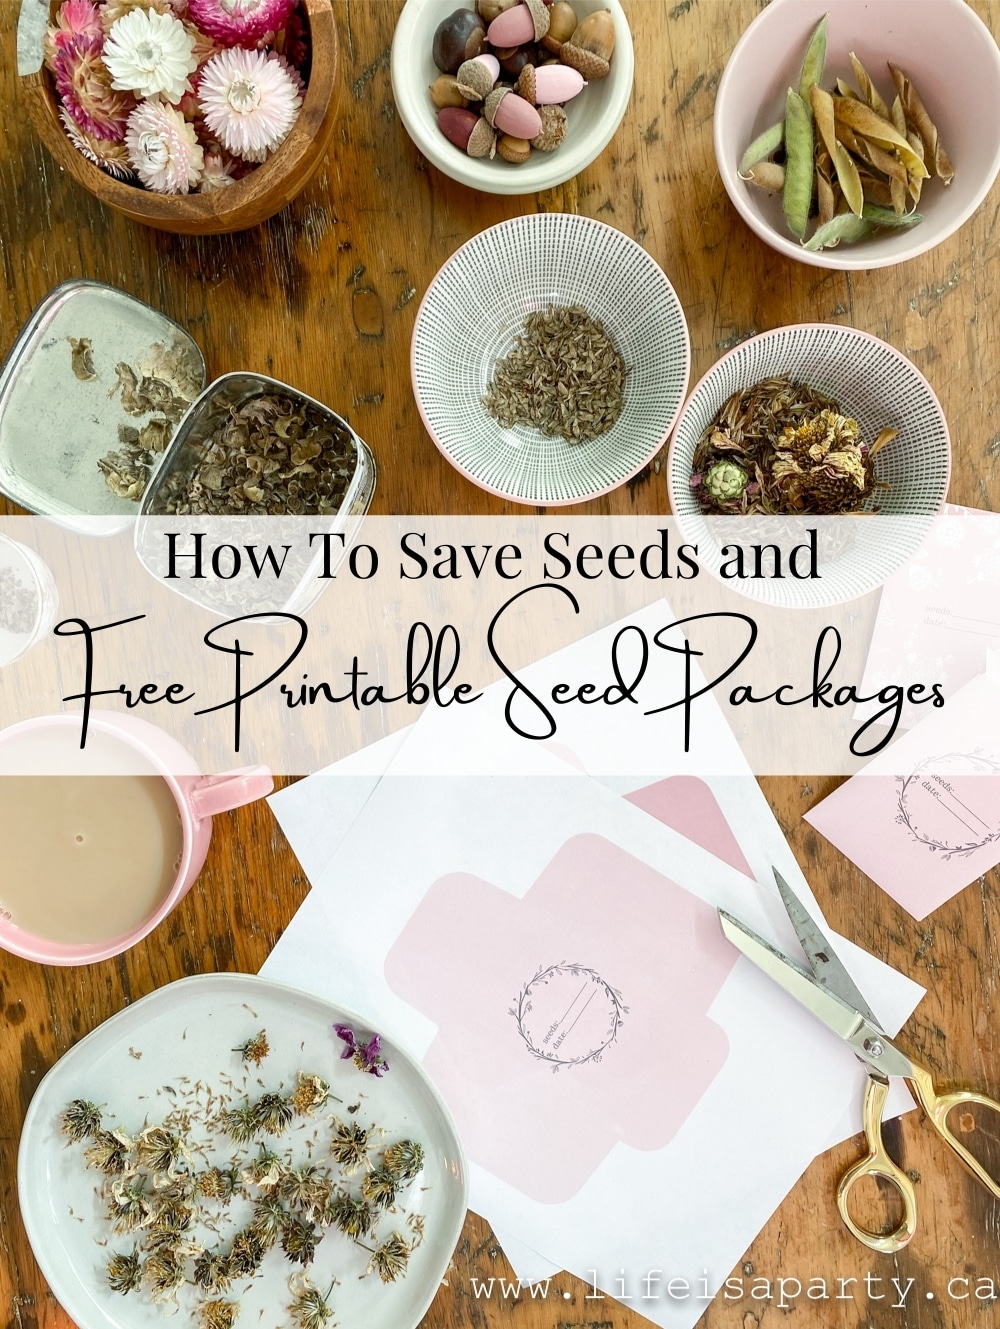 How To Save seeds and Free Printable Seed Packages To Store Them: save the seeds of your favourite plants to grow again next year.